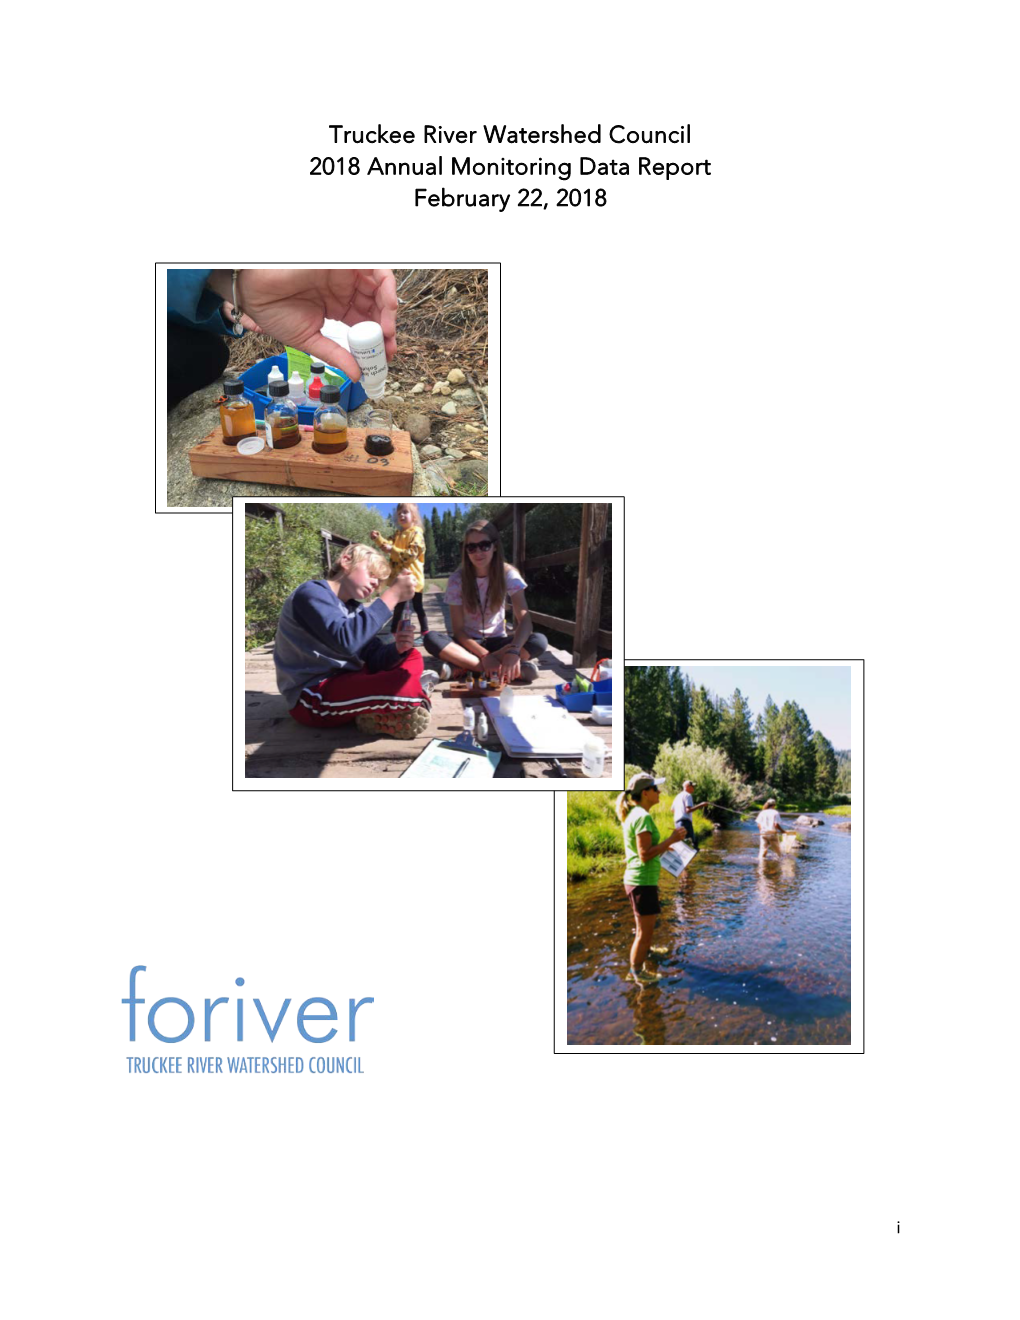 Truckee River Watershed Council 2018 Annual Monitoring Data Report February 22, 2018